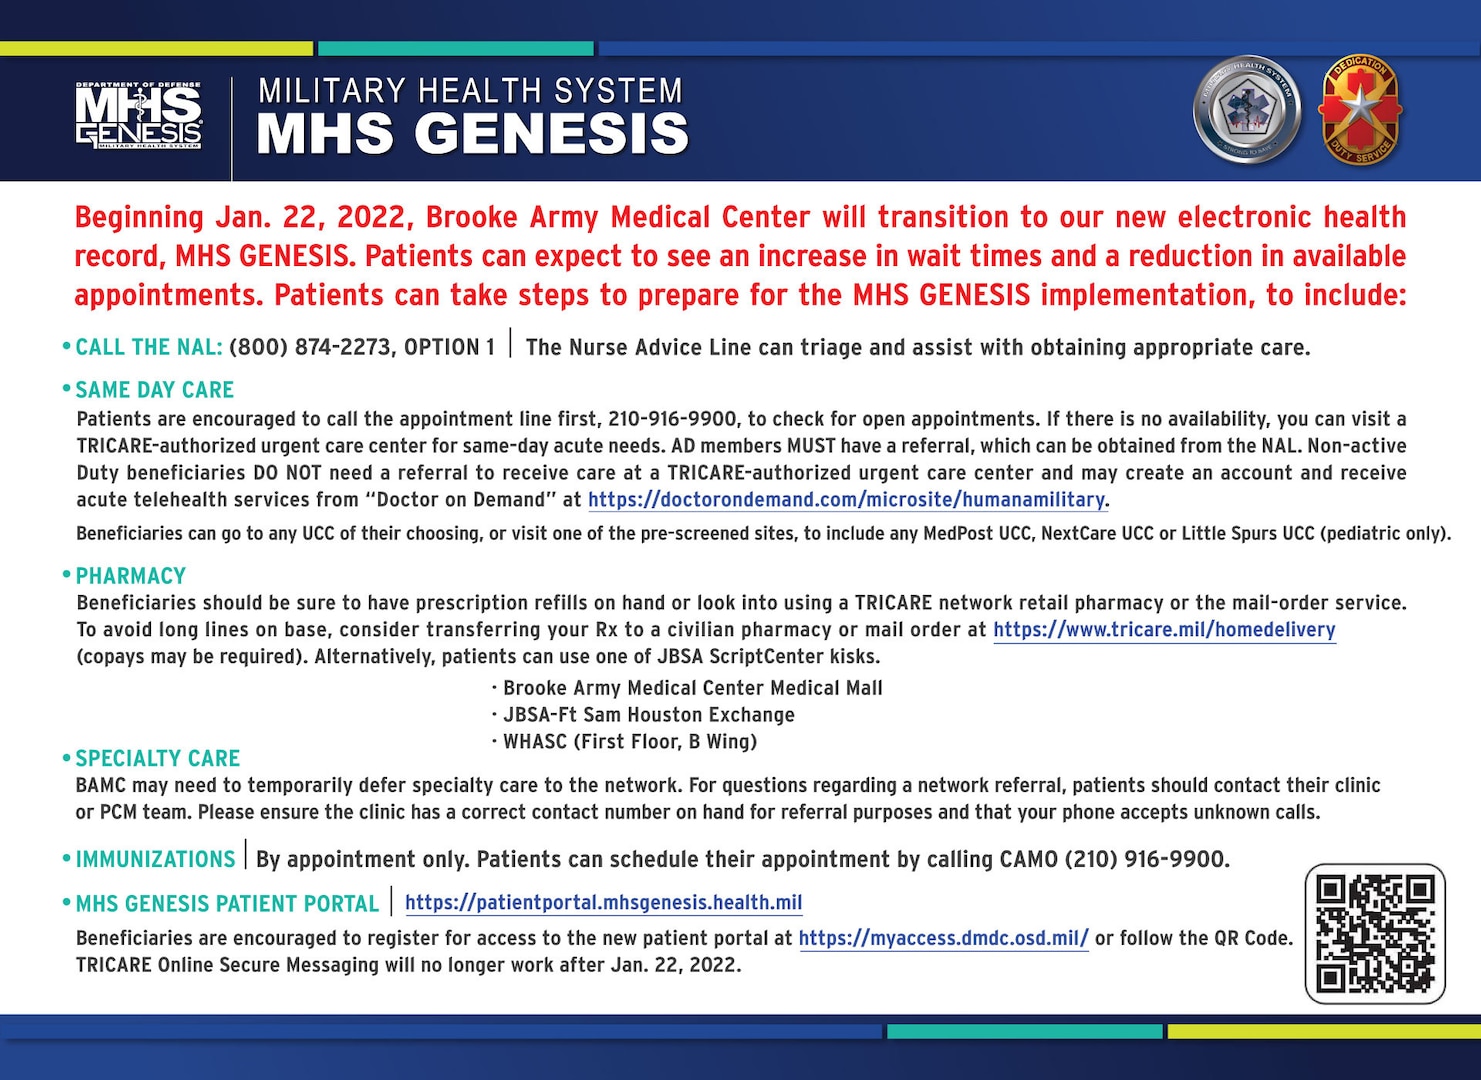 MHS GENESIS is the new electronic health record for the Military Health System